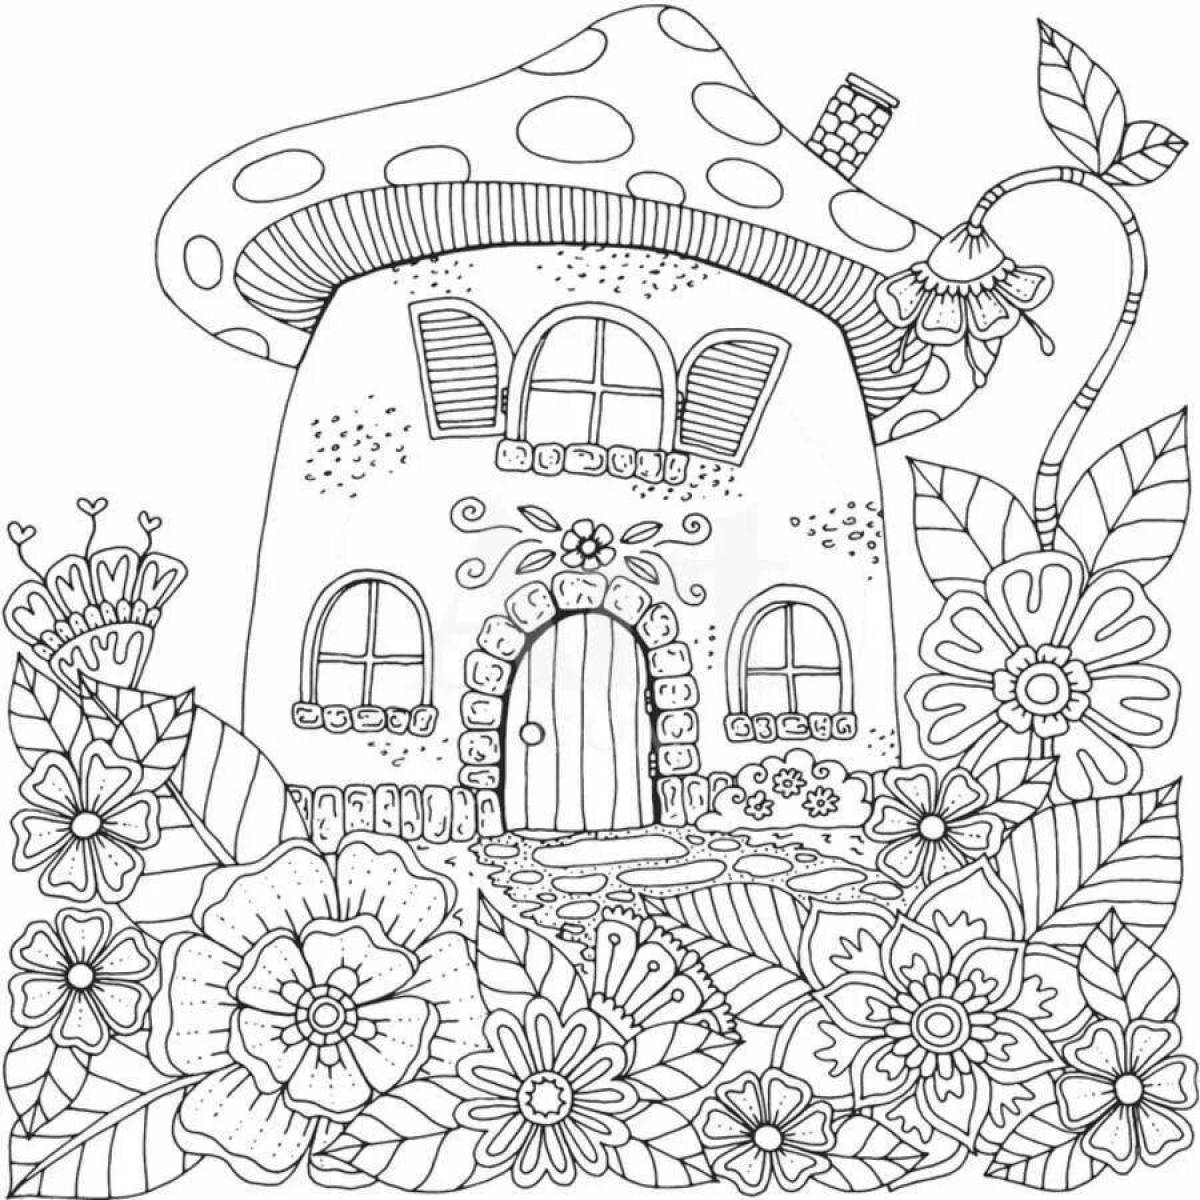 Coloring cute houses and flowers